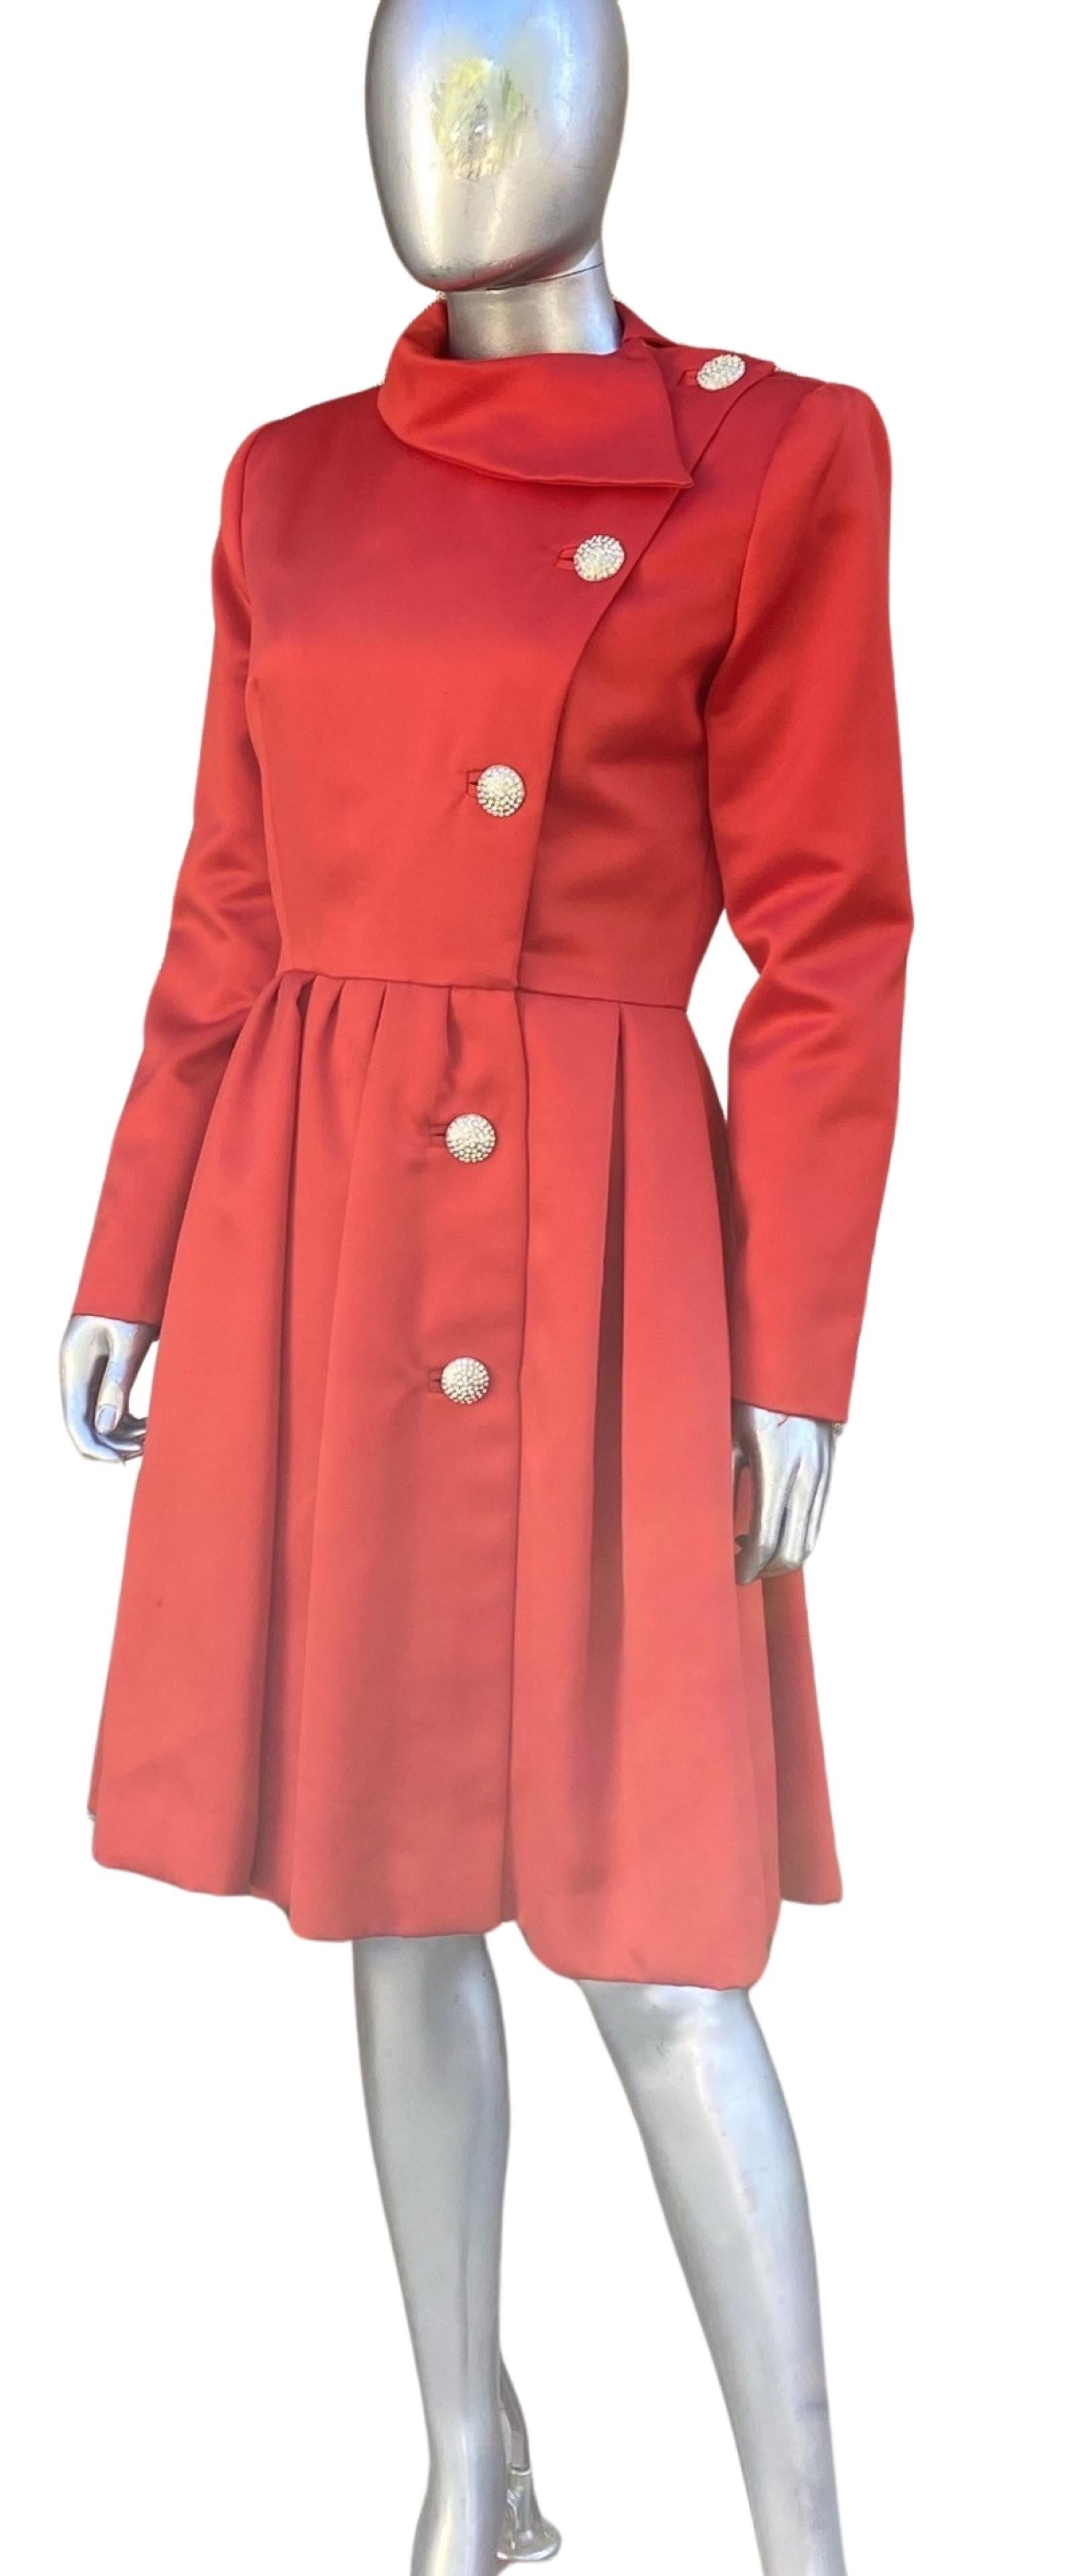 Red Satin and Rhinestone Button Coat Dress by Victor Costa Neiman Marcus Size 8 For Sale 1